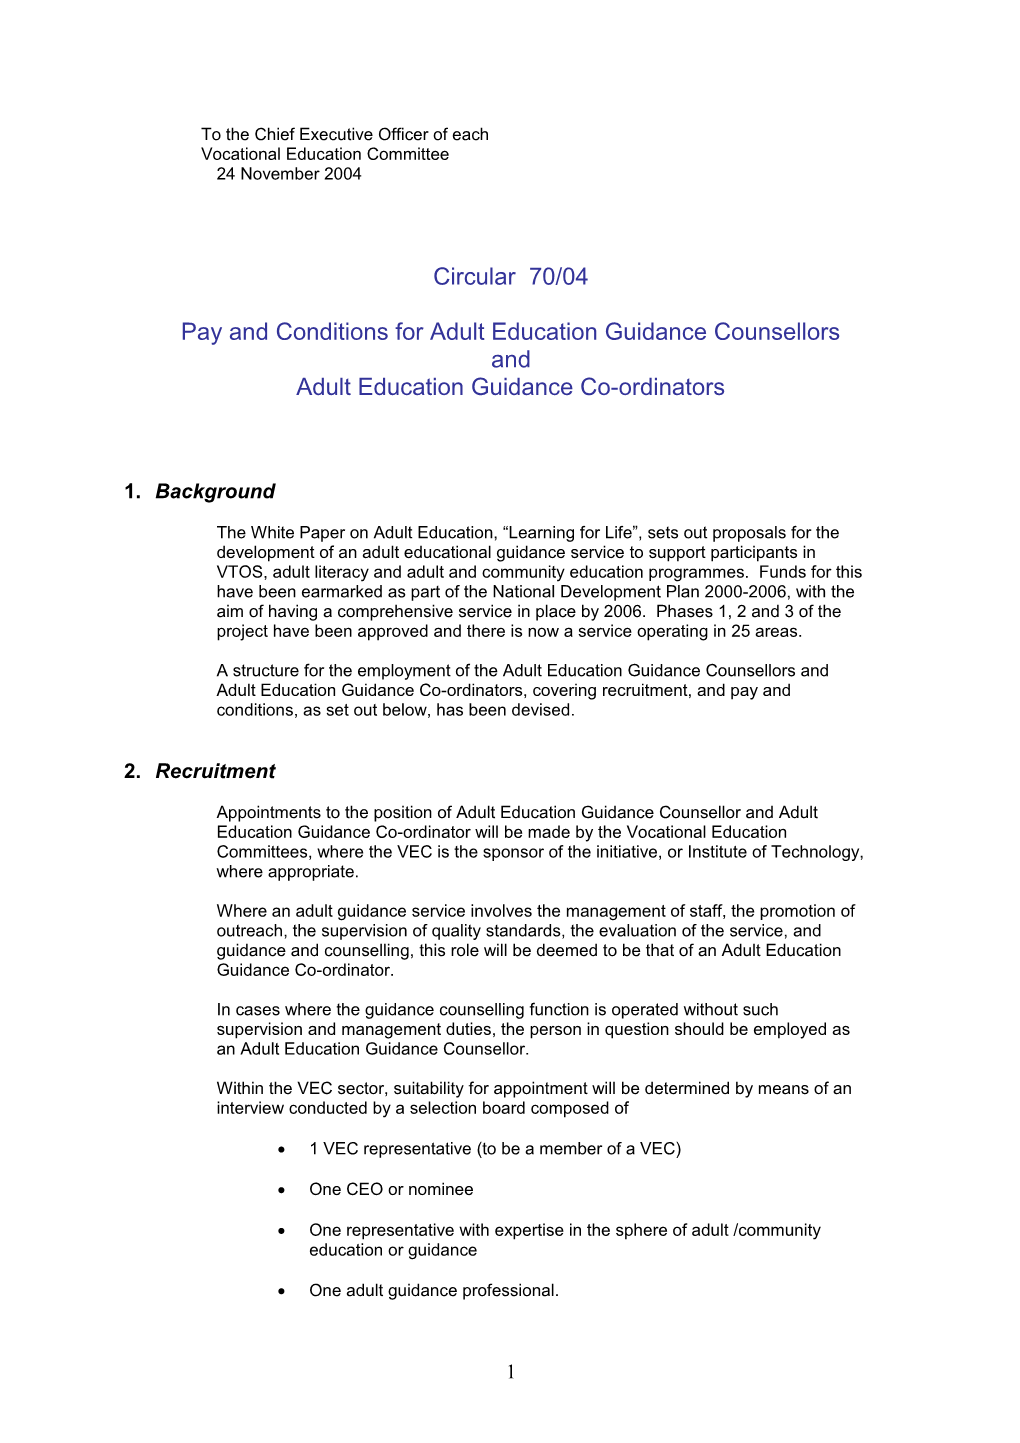 Circular 70/04 - Pay and Conditions for Adult Education Guidance Counsellors and Adult